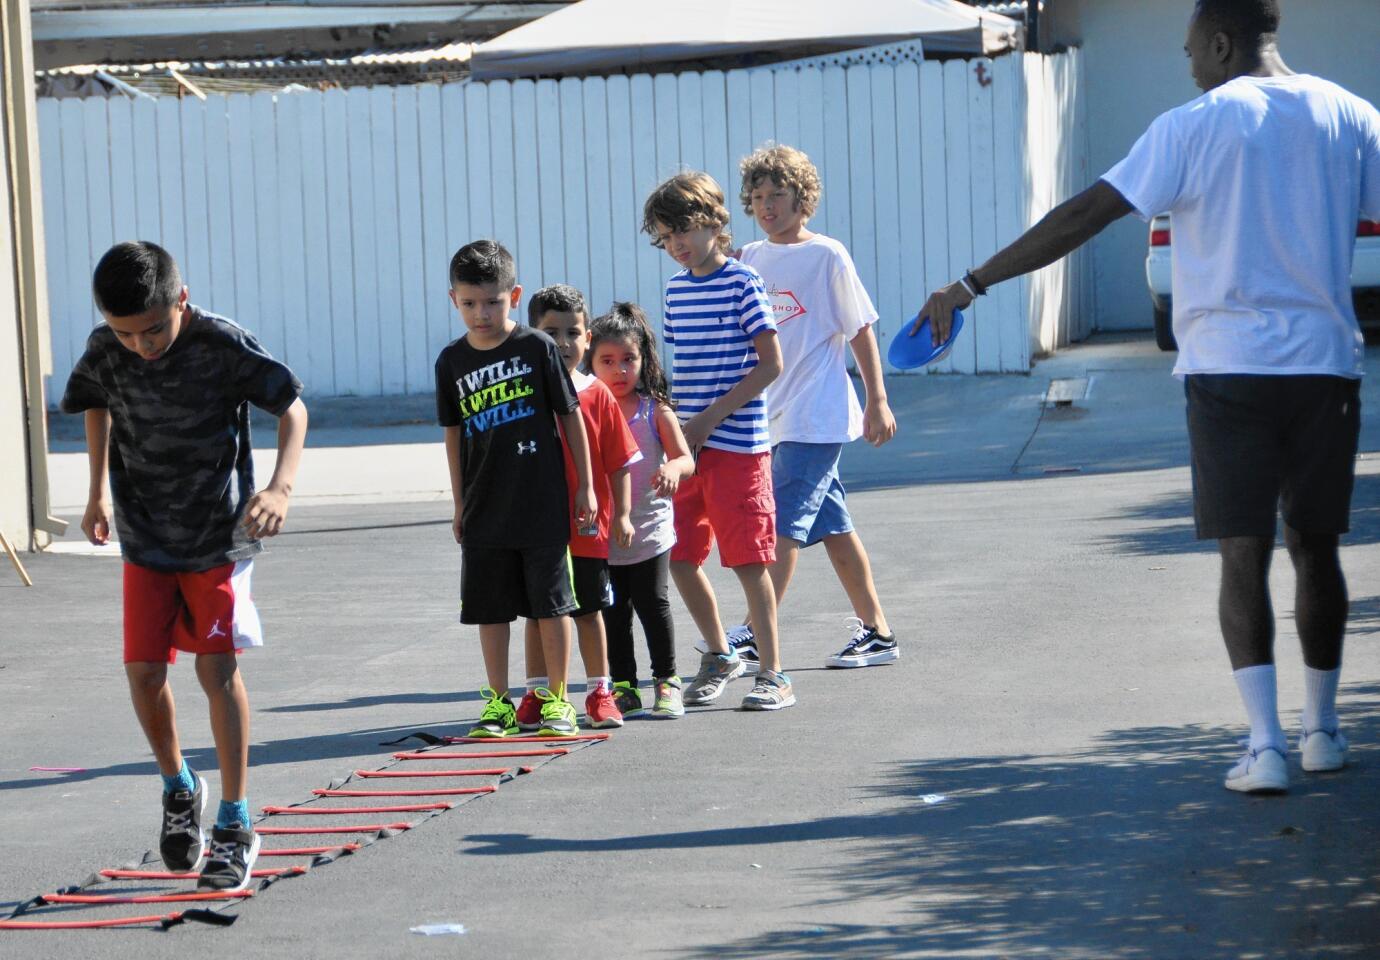 From left, students Nelson, Armani, Damien, Arlene, Gabriel and Elliot have a lesson in developing coordination skills.